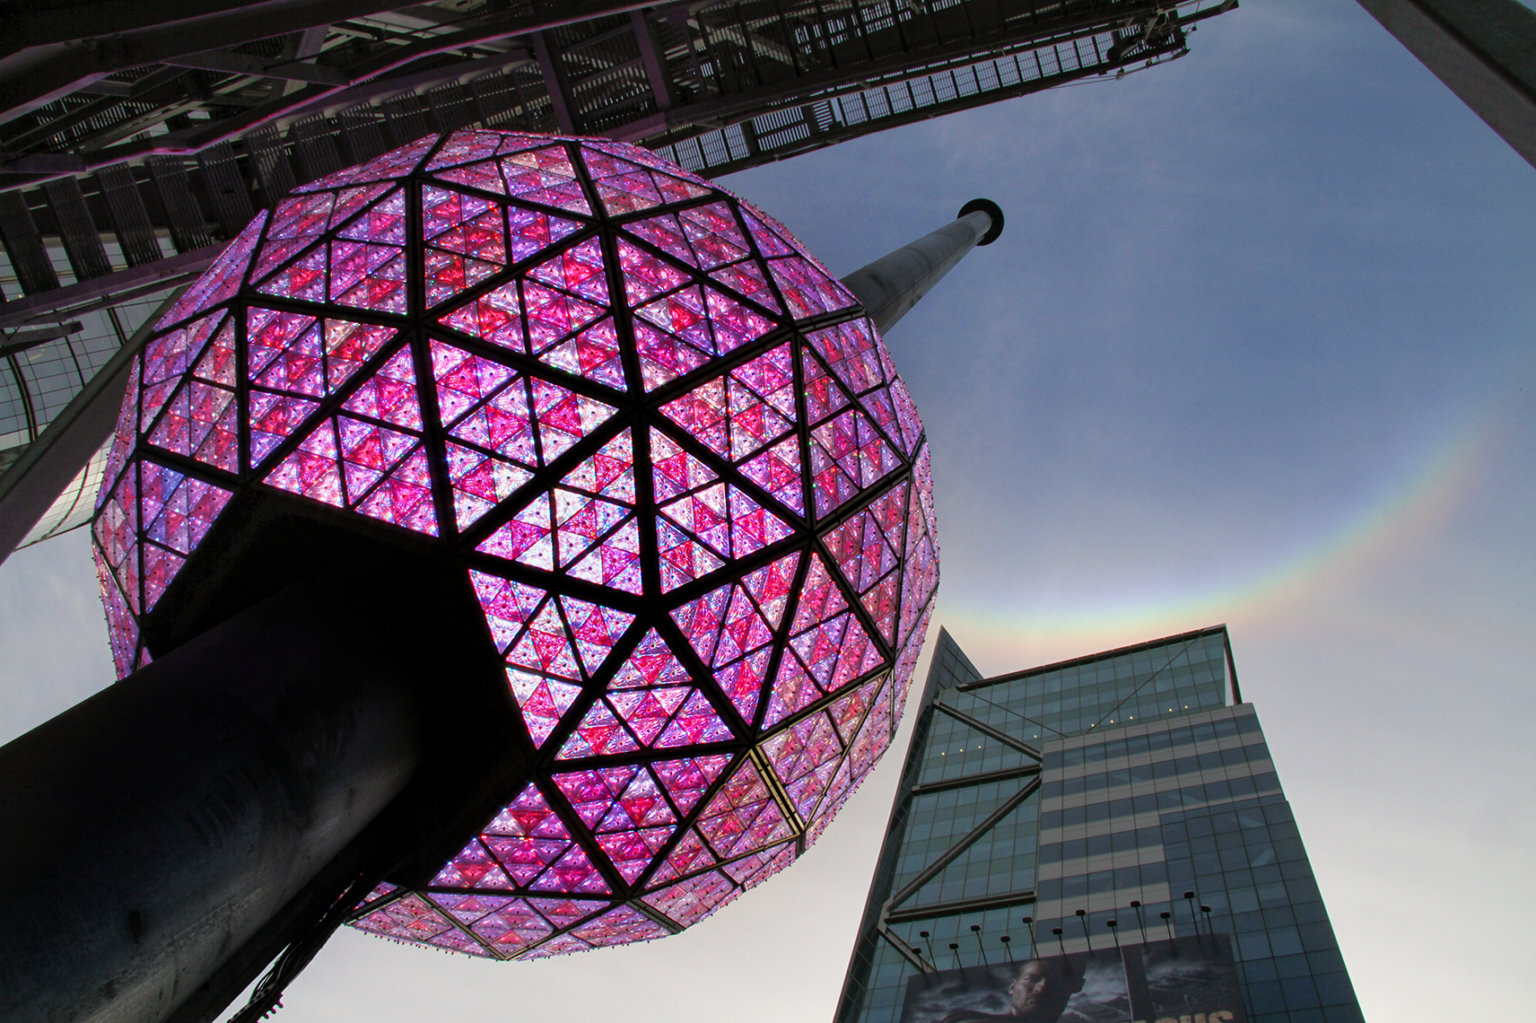 New Year’s Eve in Times Square Here’s what to expect for the big ball